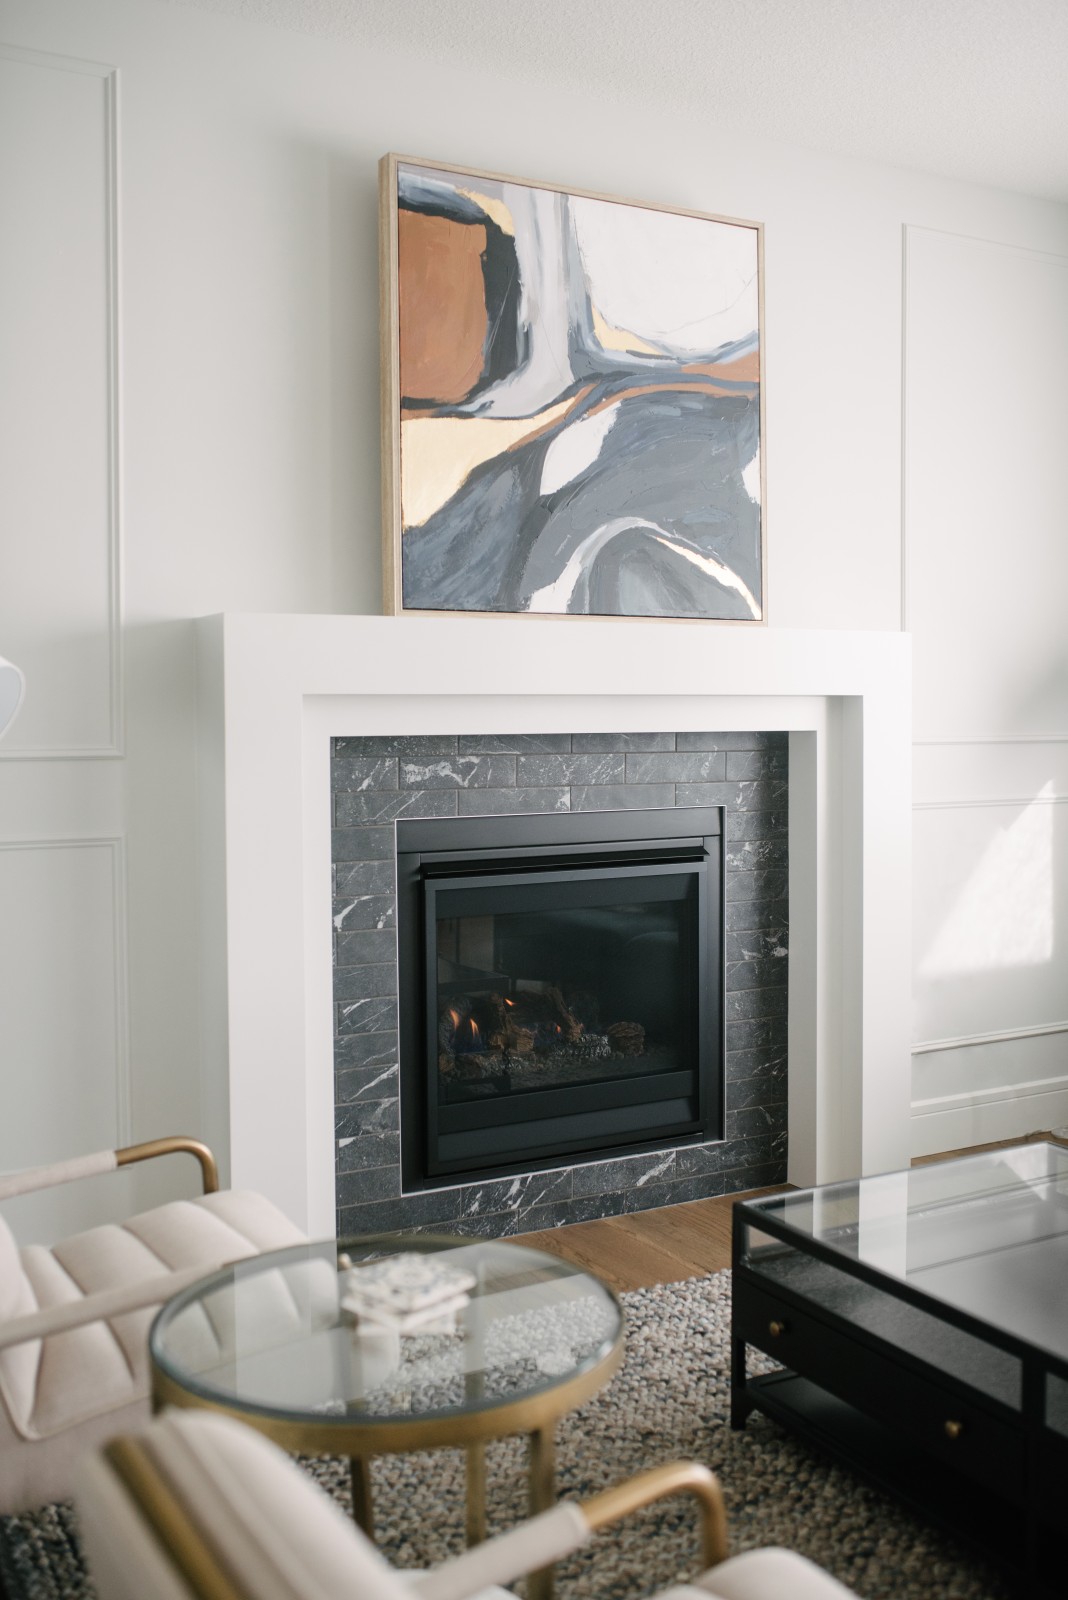 A classic fireplace with black tile, and white mantle on a wall with simple moulding detail on the wall. A large framed piece of abstract art sits on the mantle